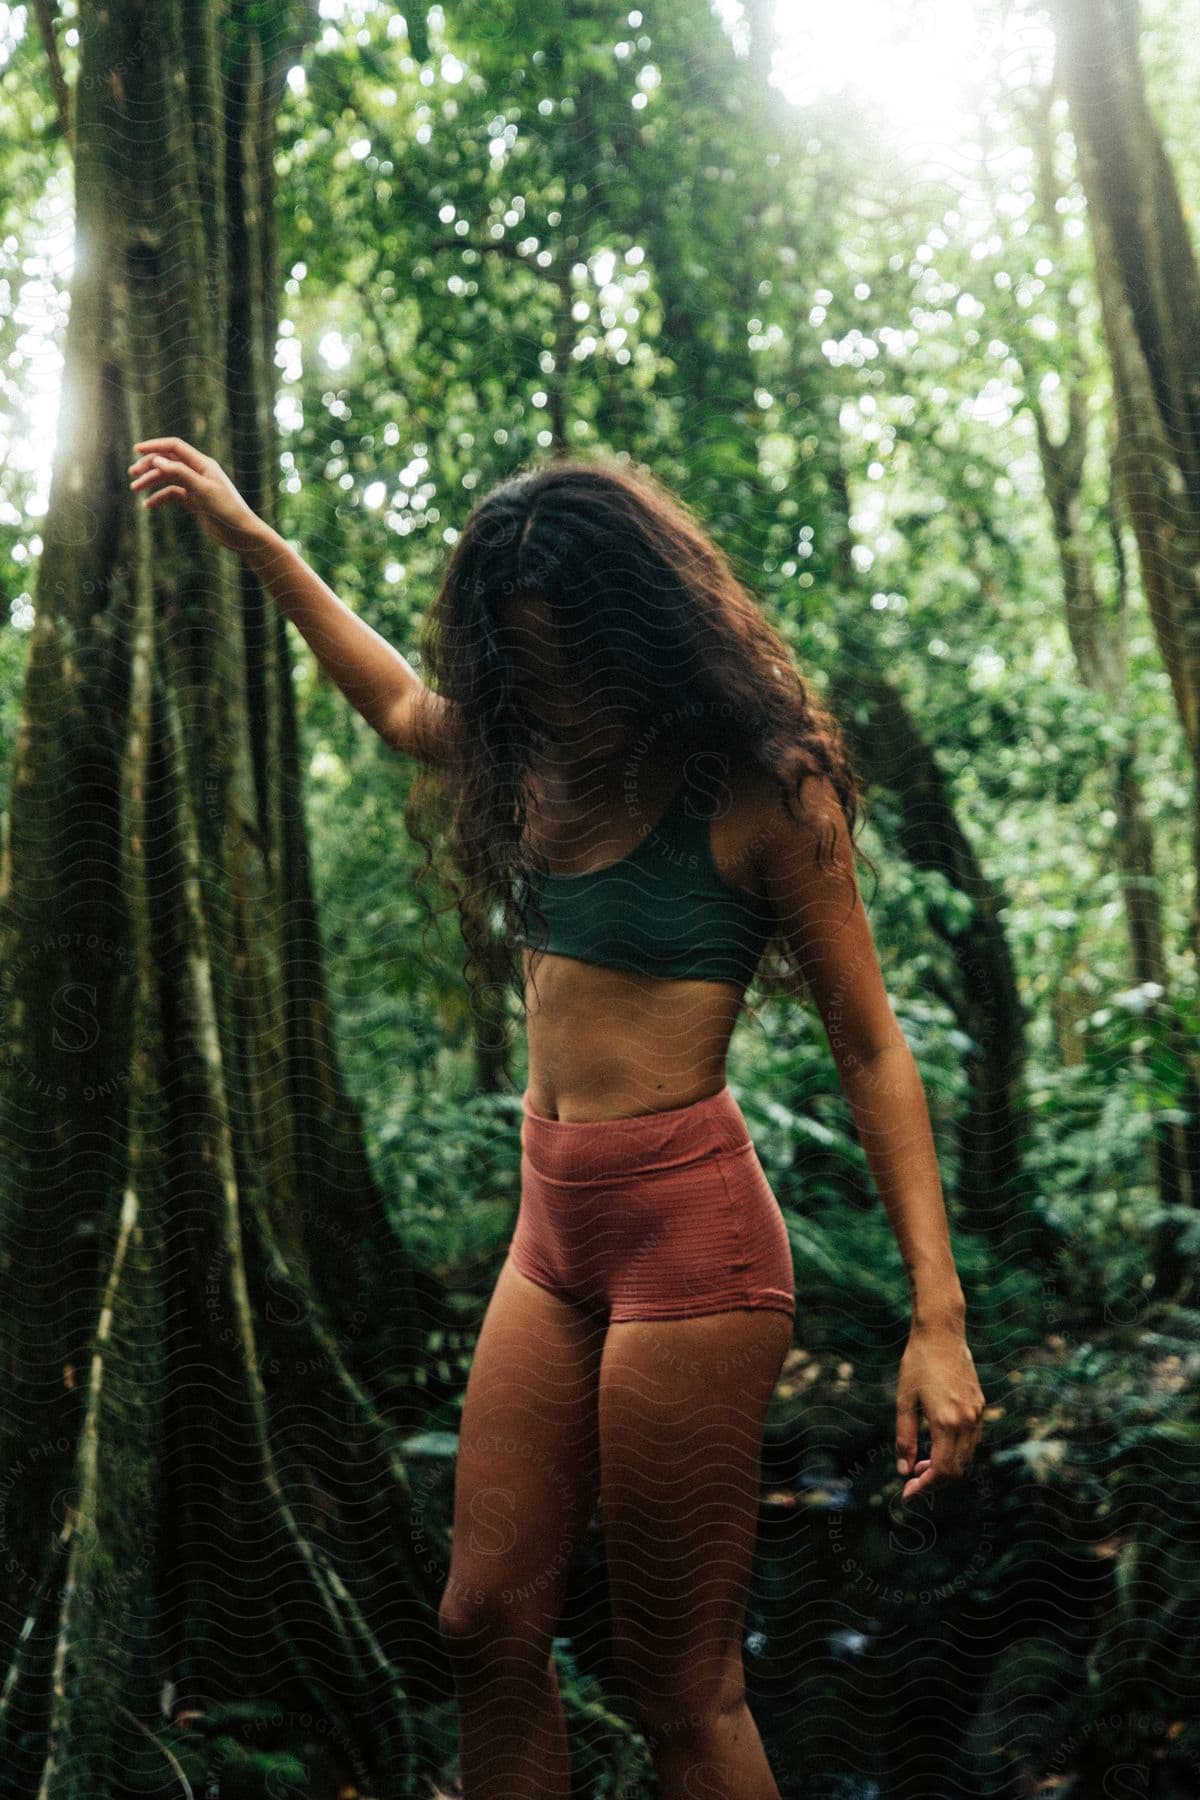 A woman with dark wavy hair green bra and red shorts walks in the jungle